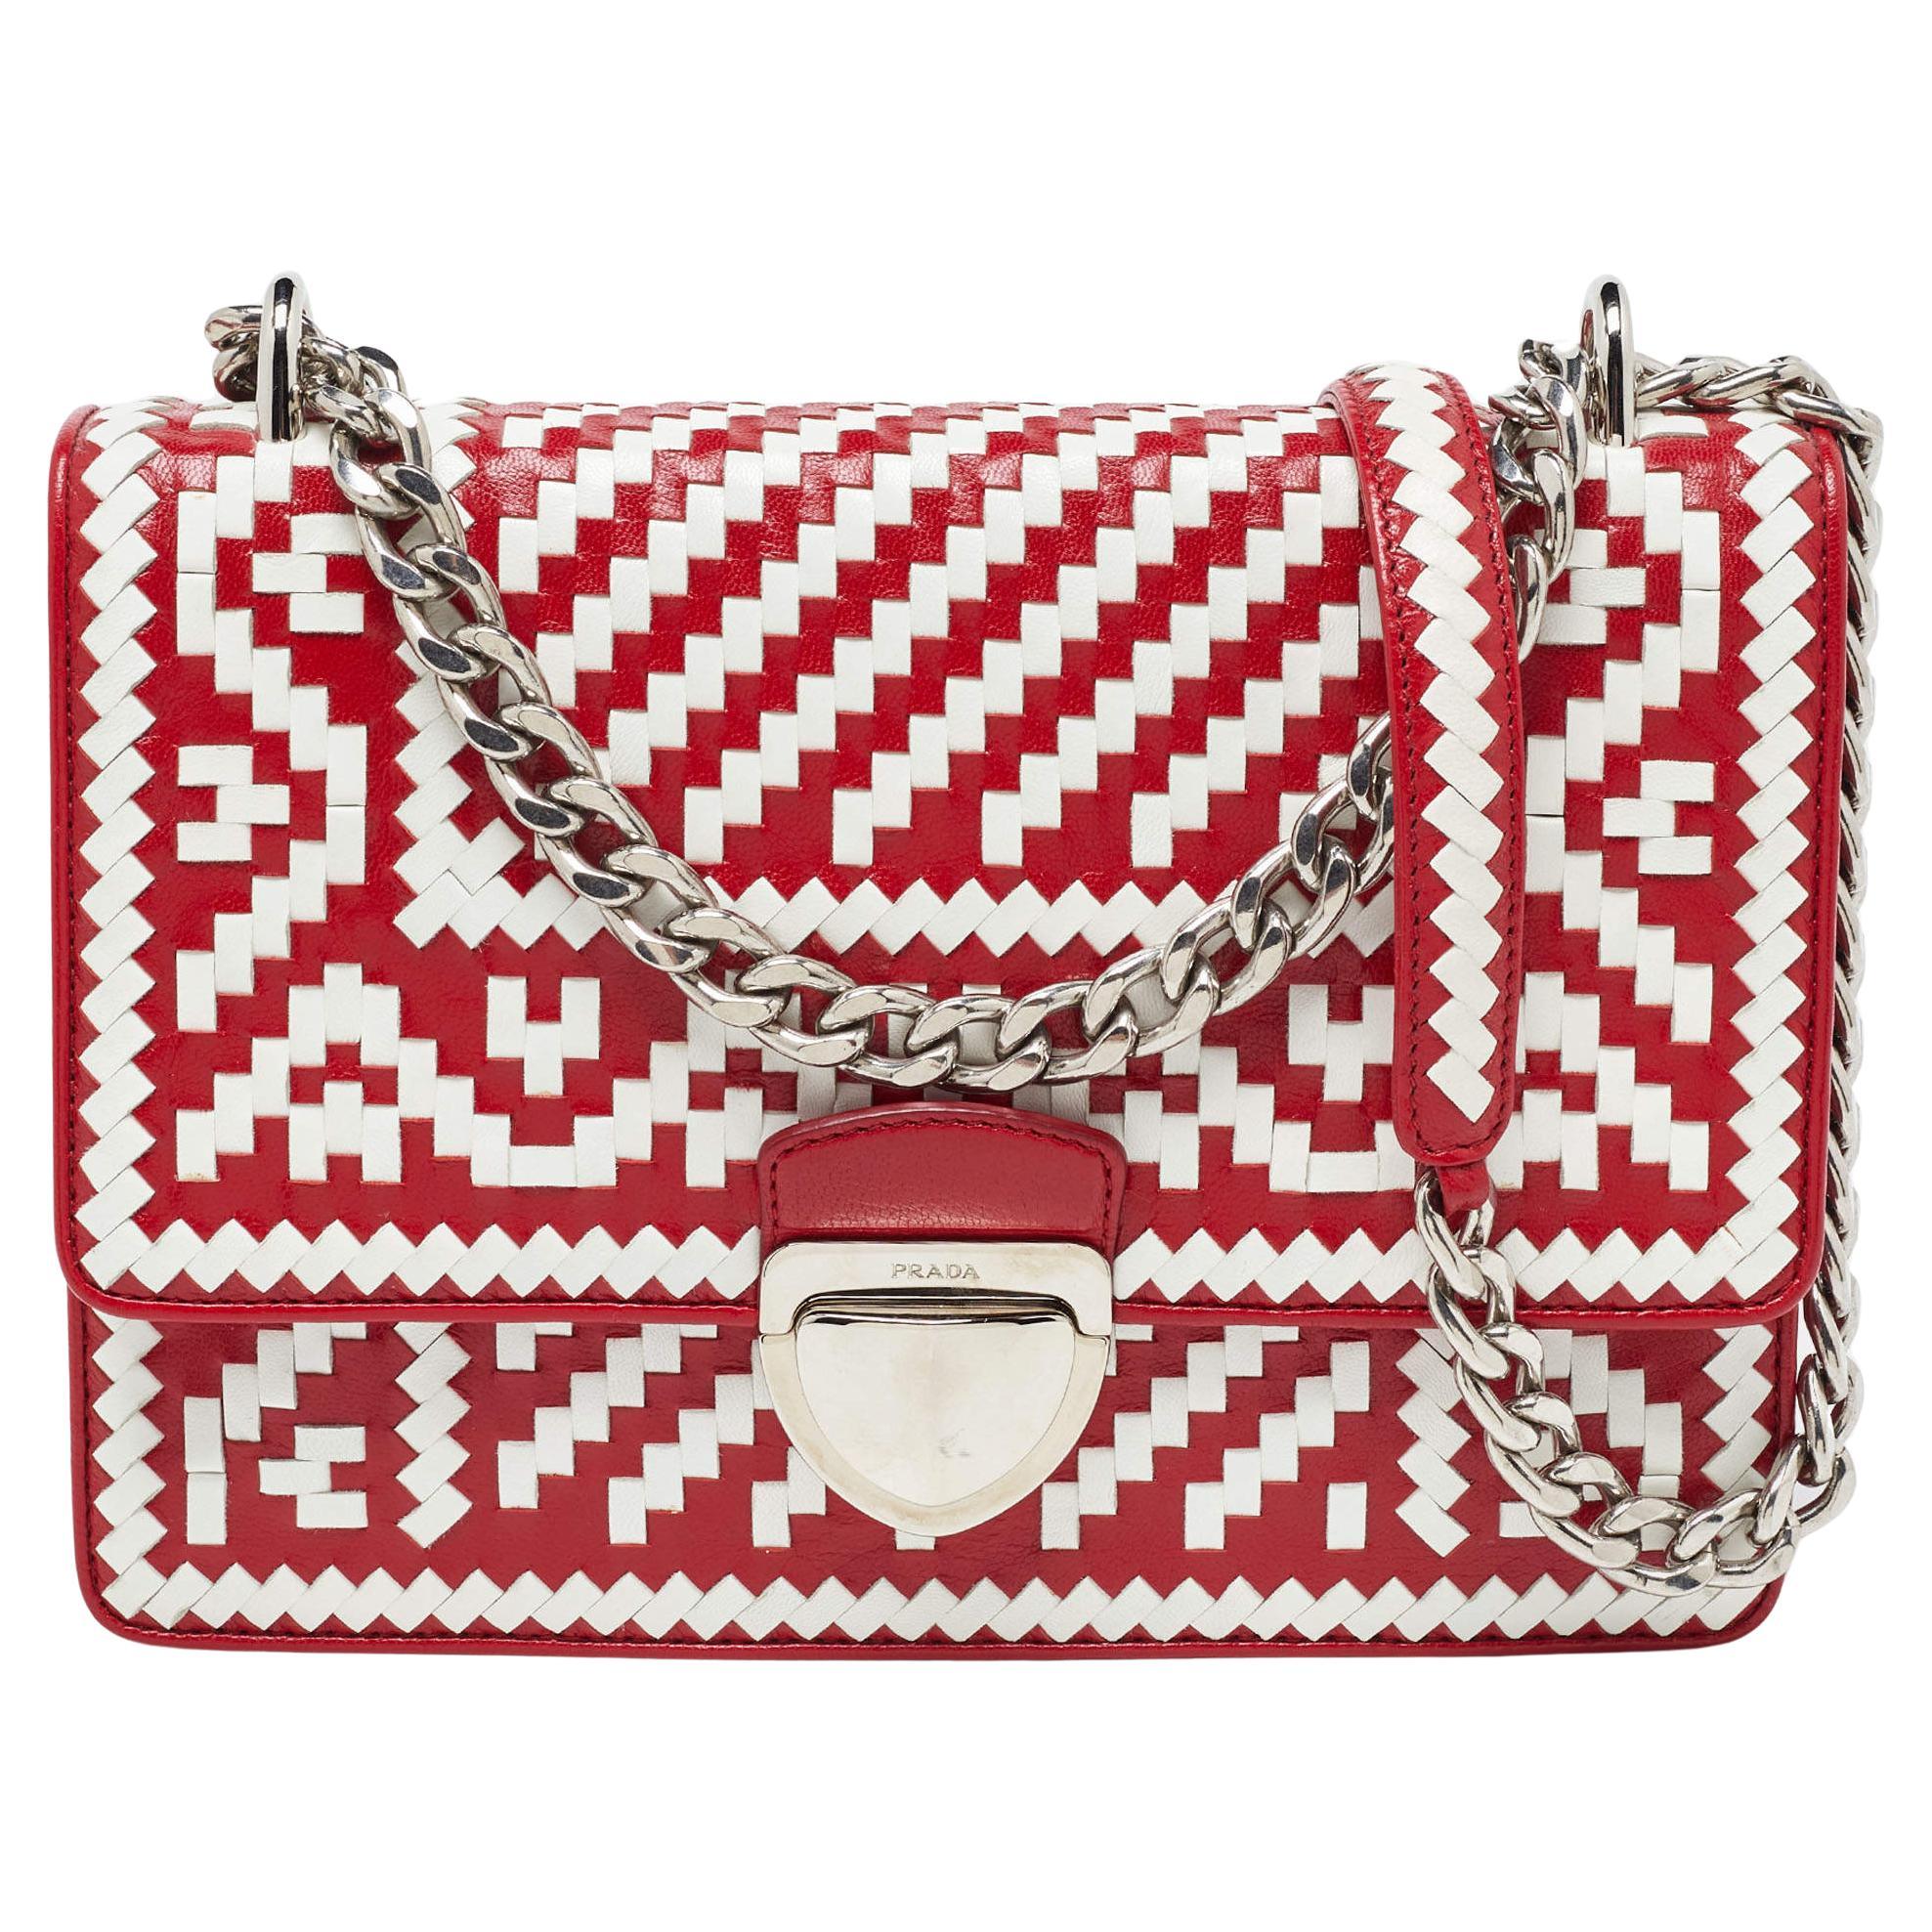 Prada Red/White Madras Woven Leather Pushlock Flap Bag For Sale